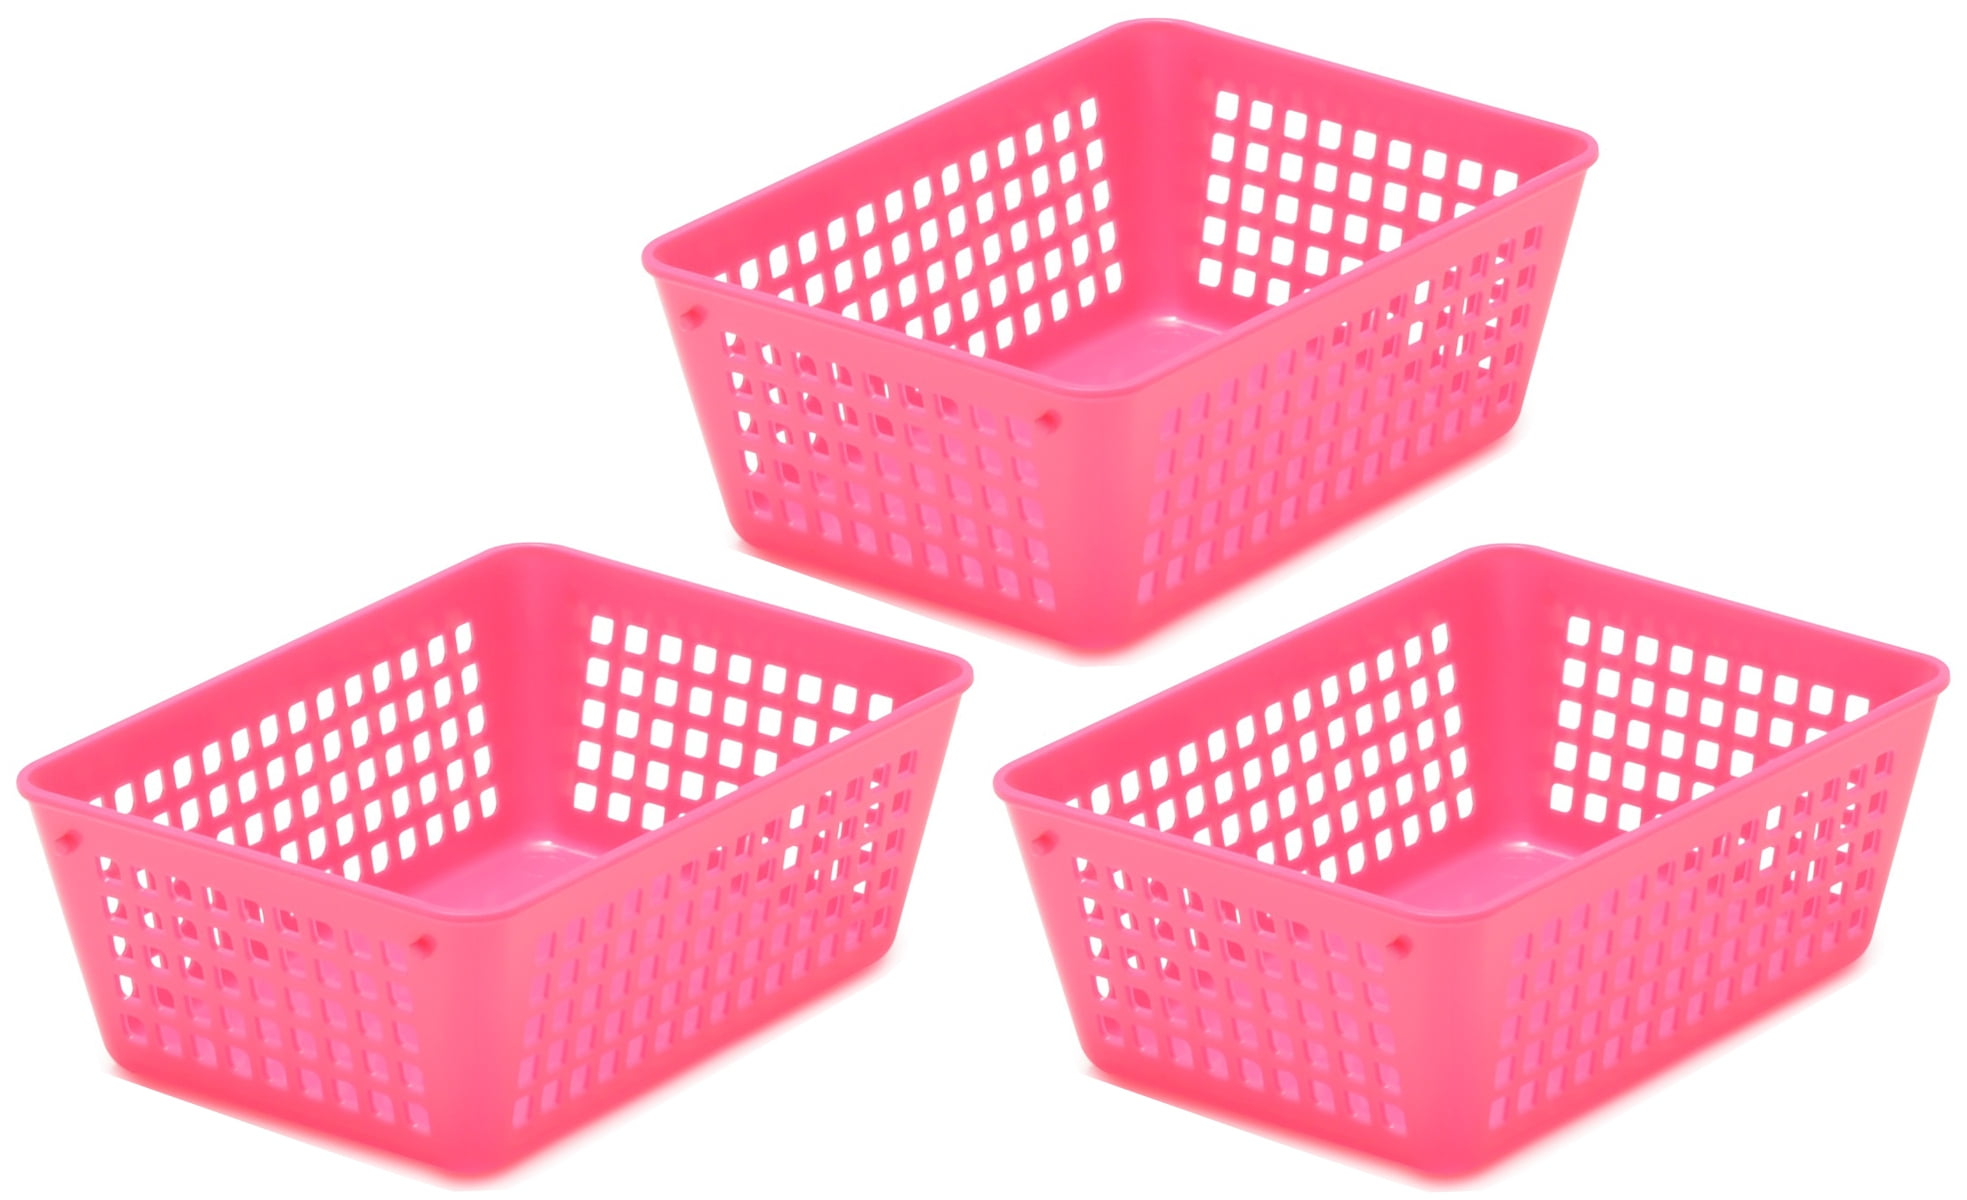 Organizer, plastic, pink and clear, 4-3/4 x 4-5/8 x 3-13/16 inches